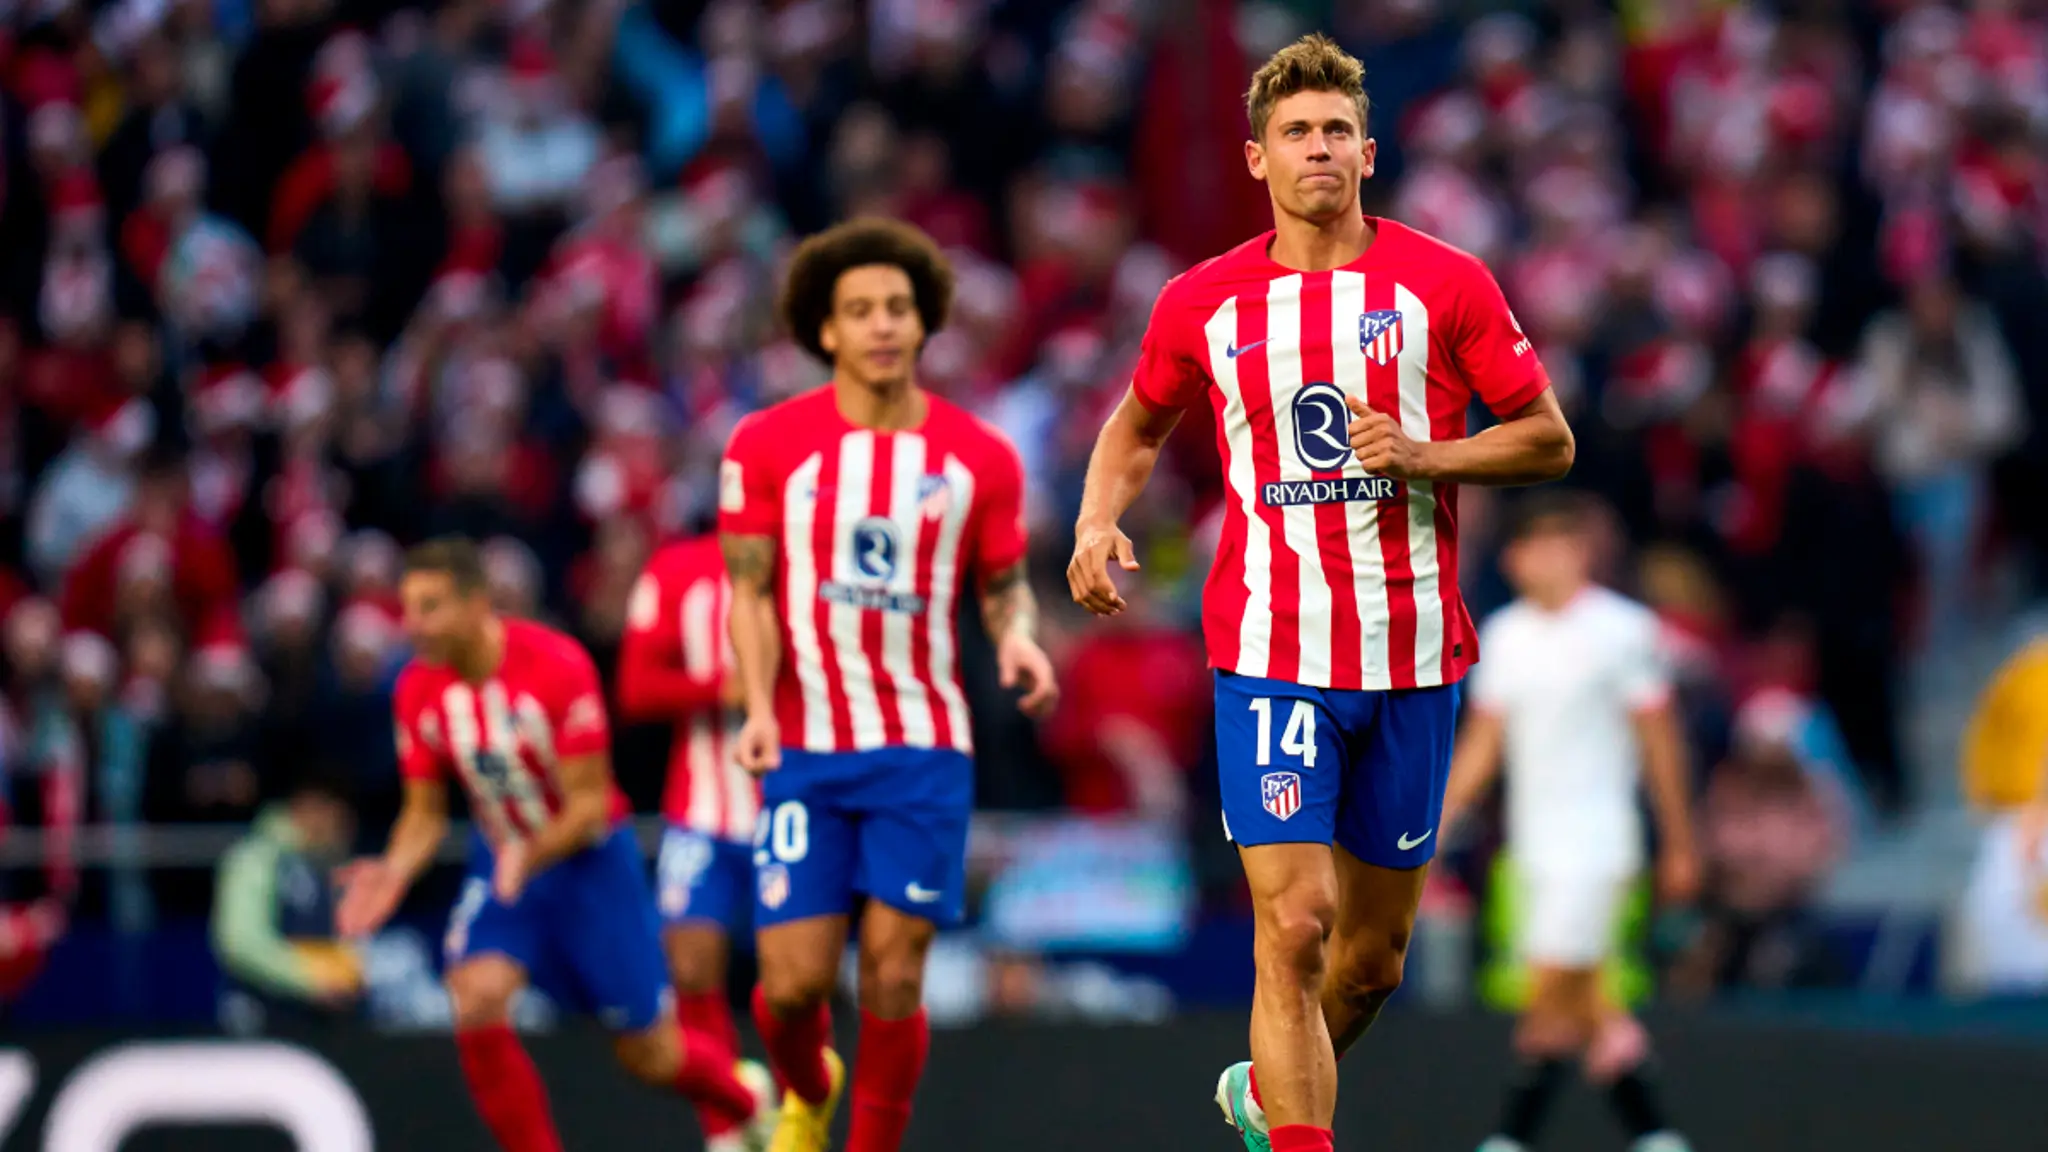 Girona v Atlético Madrid: what the stats say | SuperSport